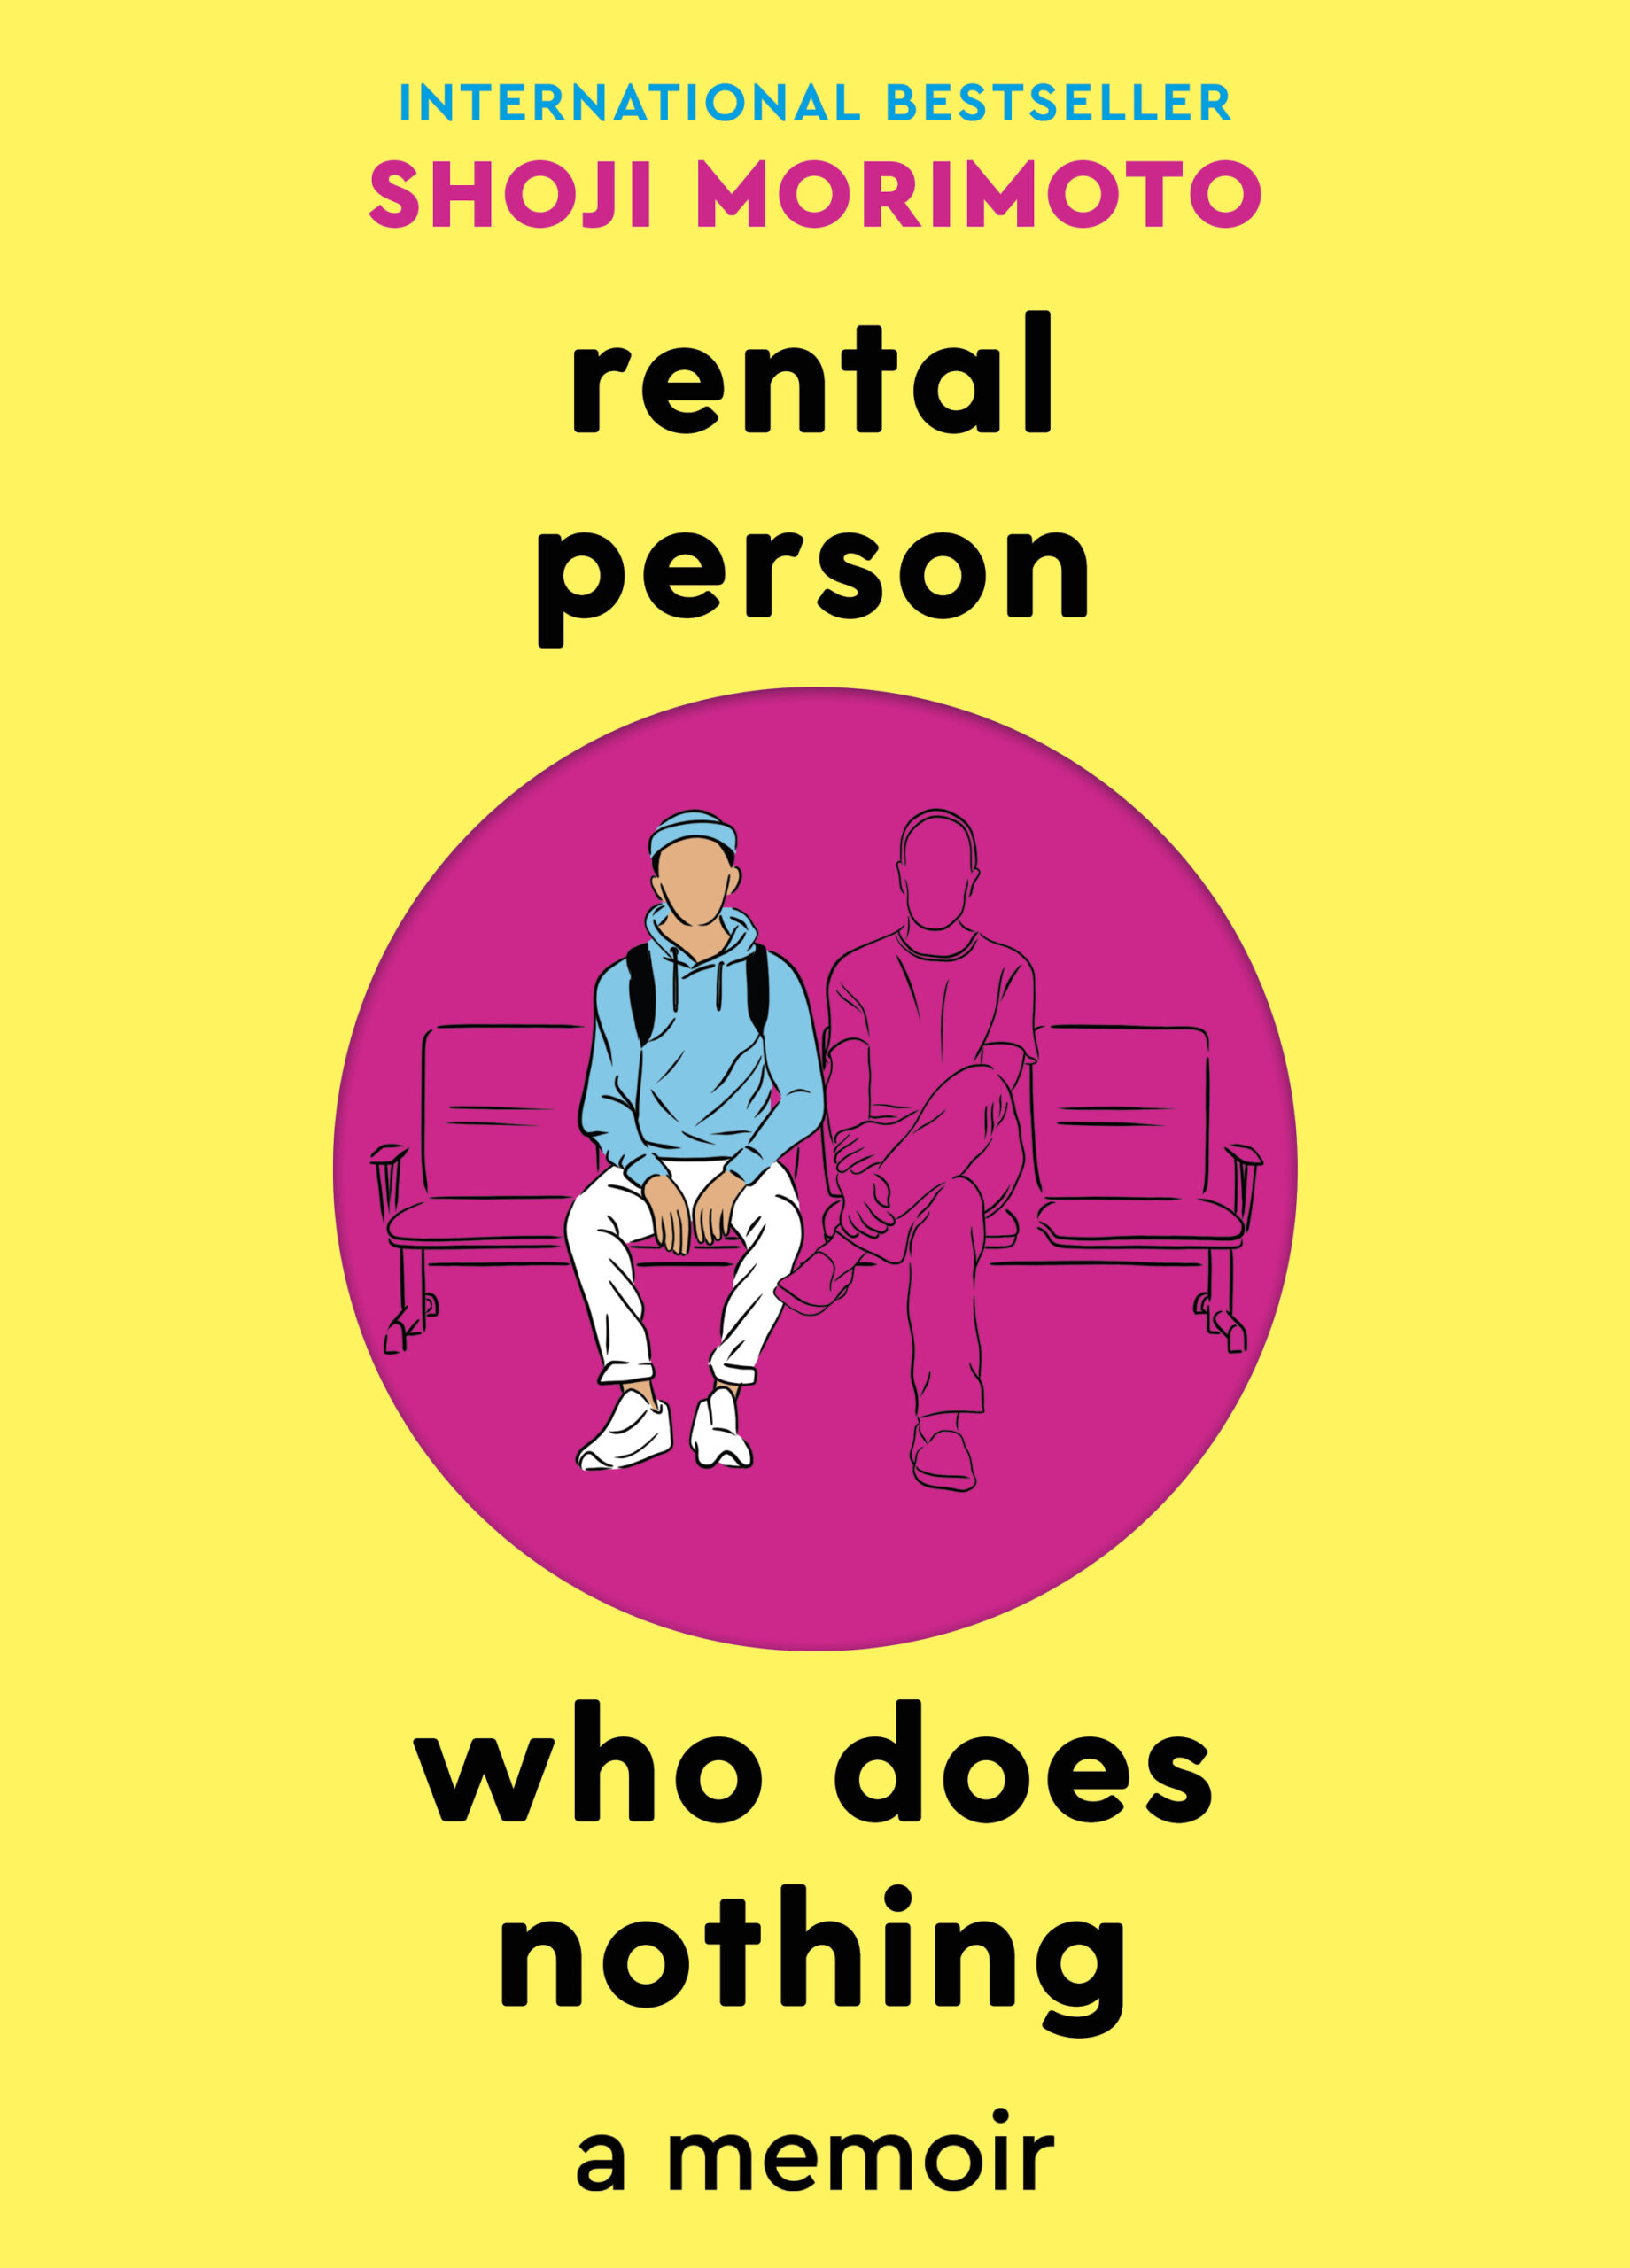 One of our recommended books is Rental Person Who Does Nothing by Shoji Morimoto